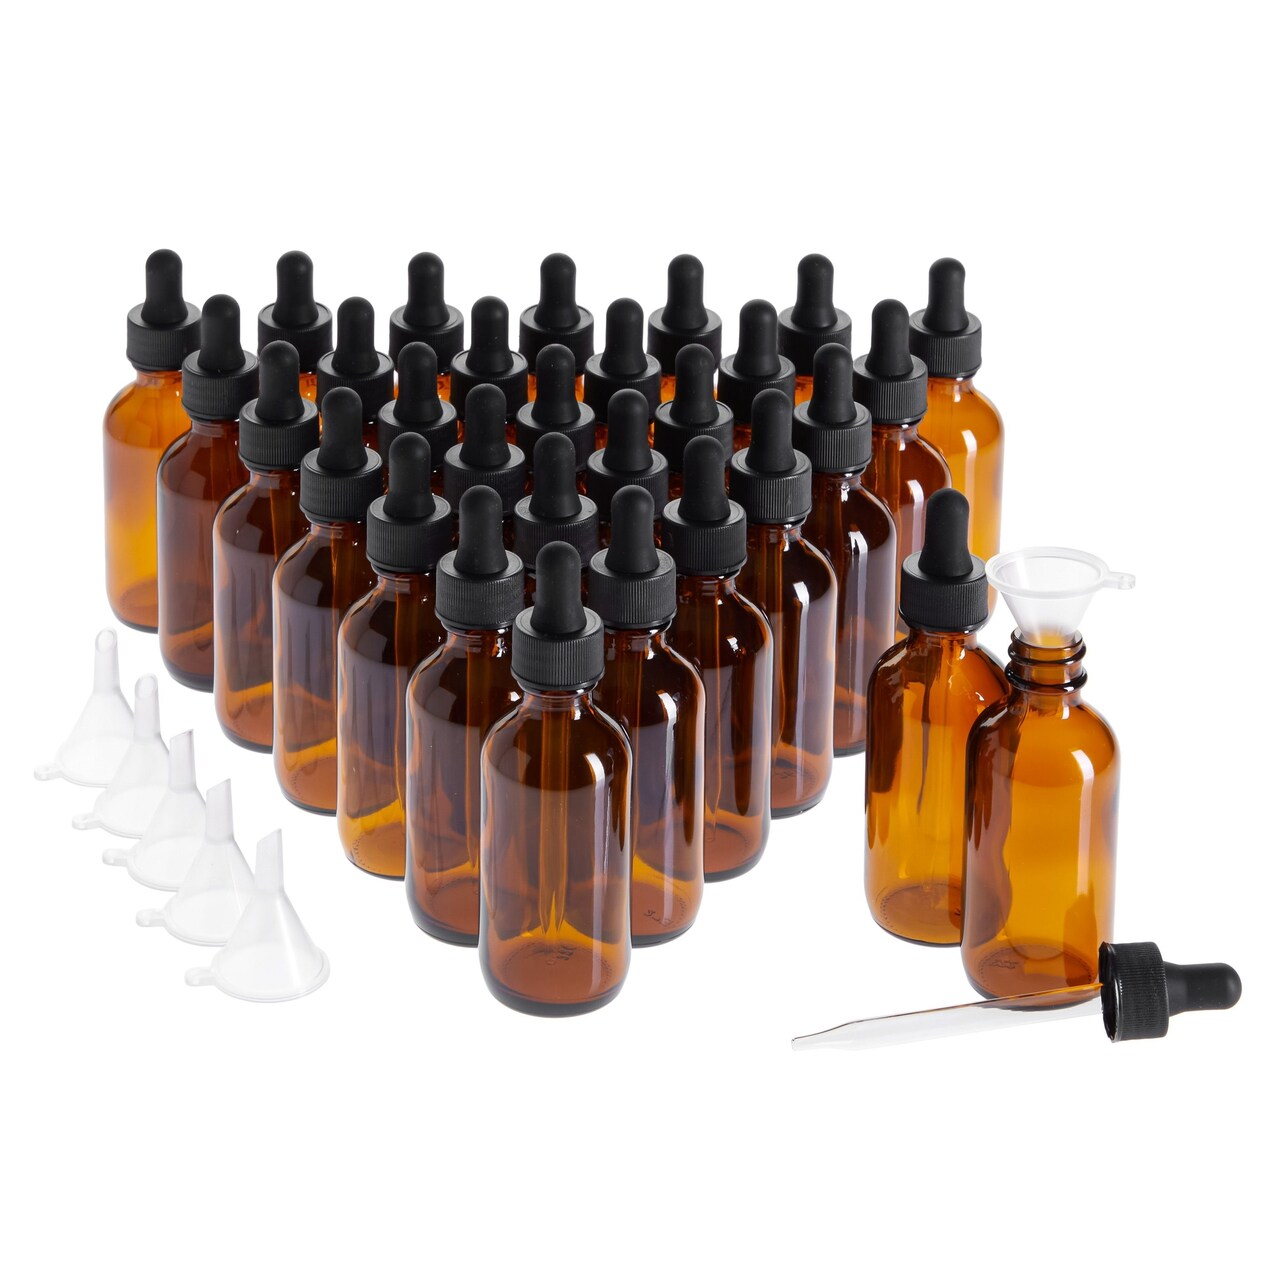 30 Pack 2oz Amber Glass Bottles with Eye Dropper Dispenser and 6 Funnels for Essential Oils, Travel Aromatherapy Perfume, Liquids (60 ml)